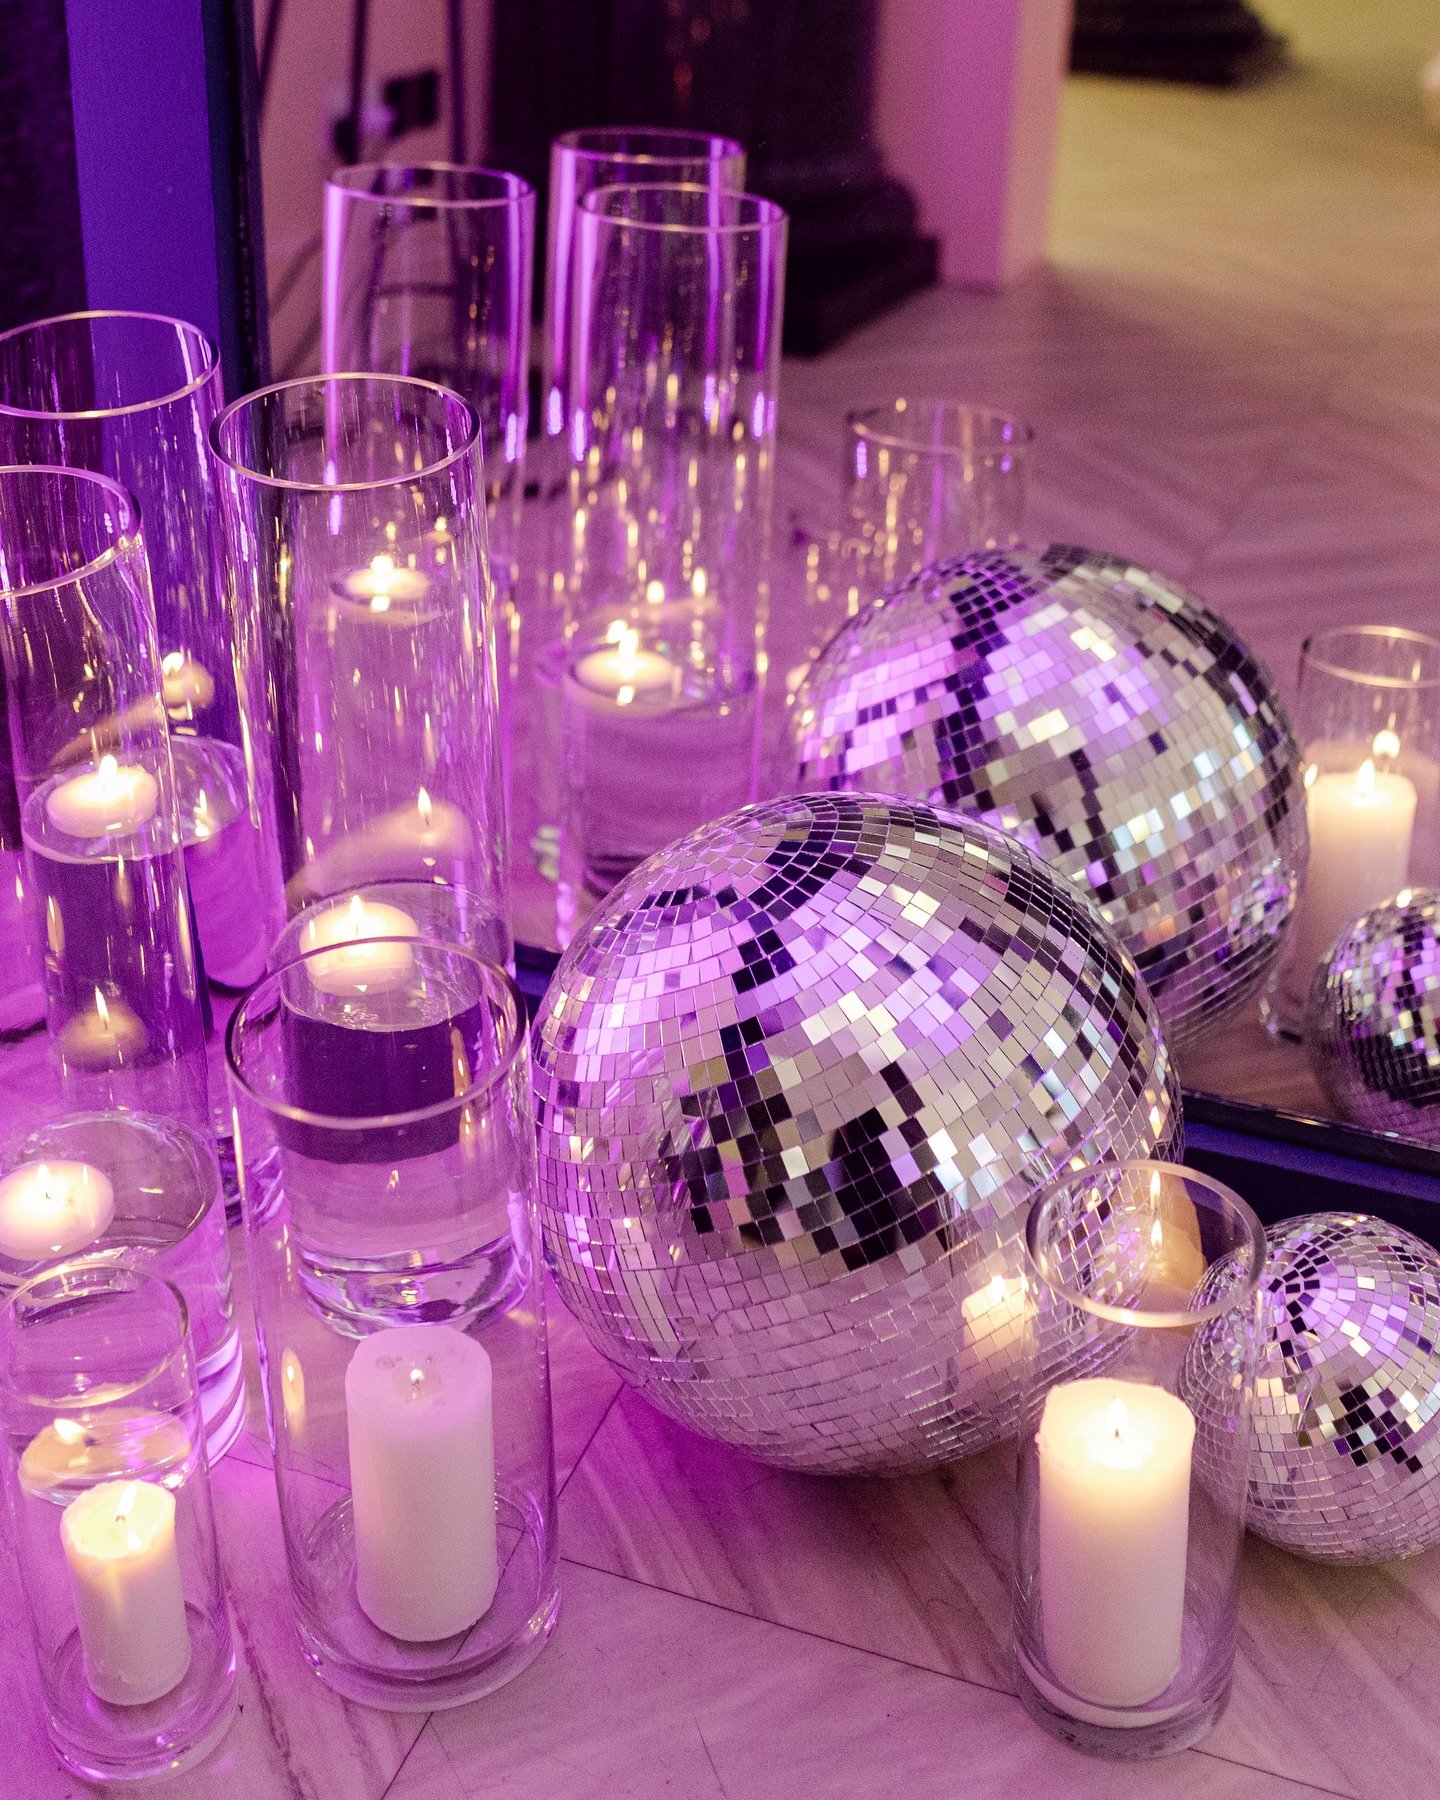 Disco balls at a wedding?! Hell yes ✨

Disco balls are the perfect way to add a touch of sparkle and a whole lot of fun to your decor 🪩

We have various sized disco balls available to enhance your space 

Enquire online to receive our hire catalogue